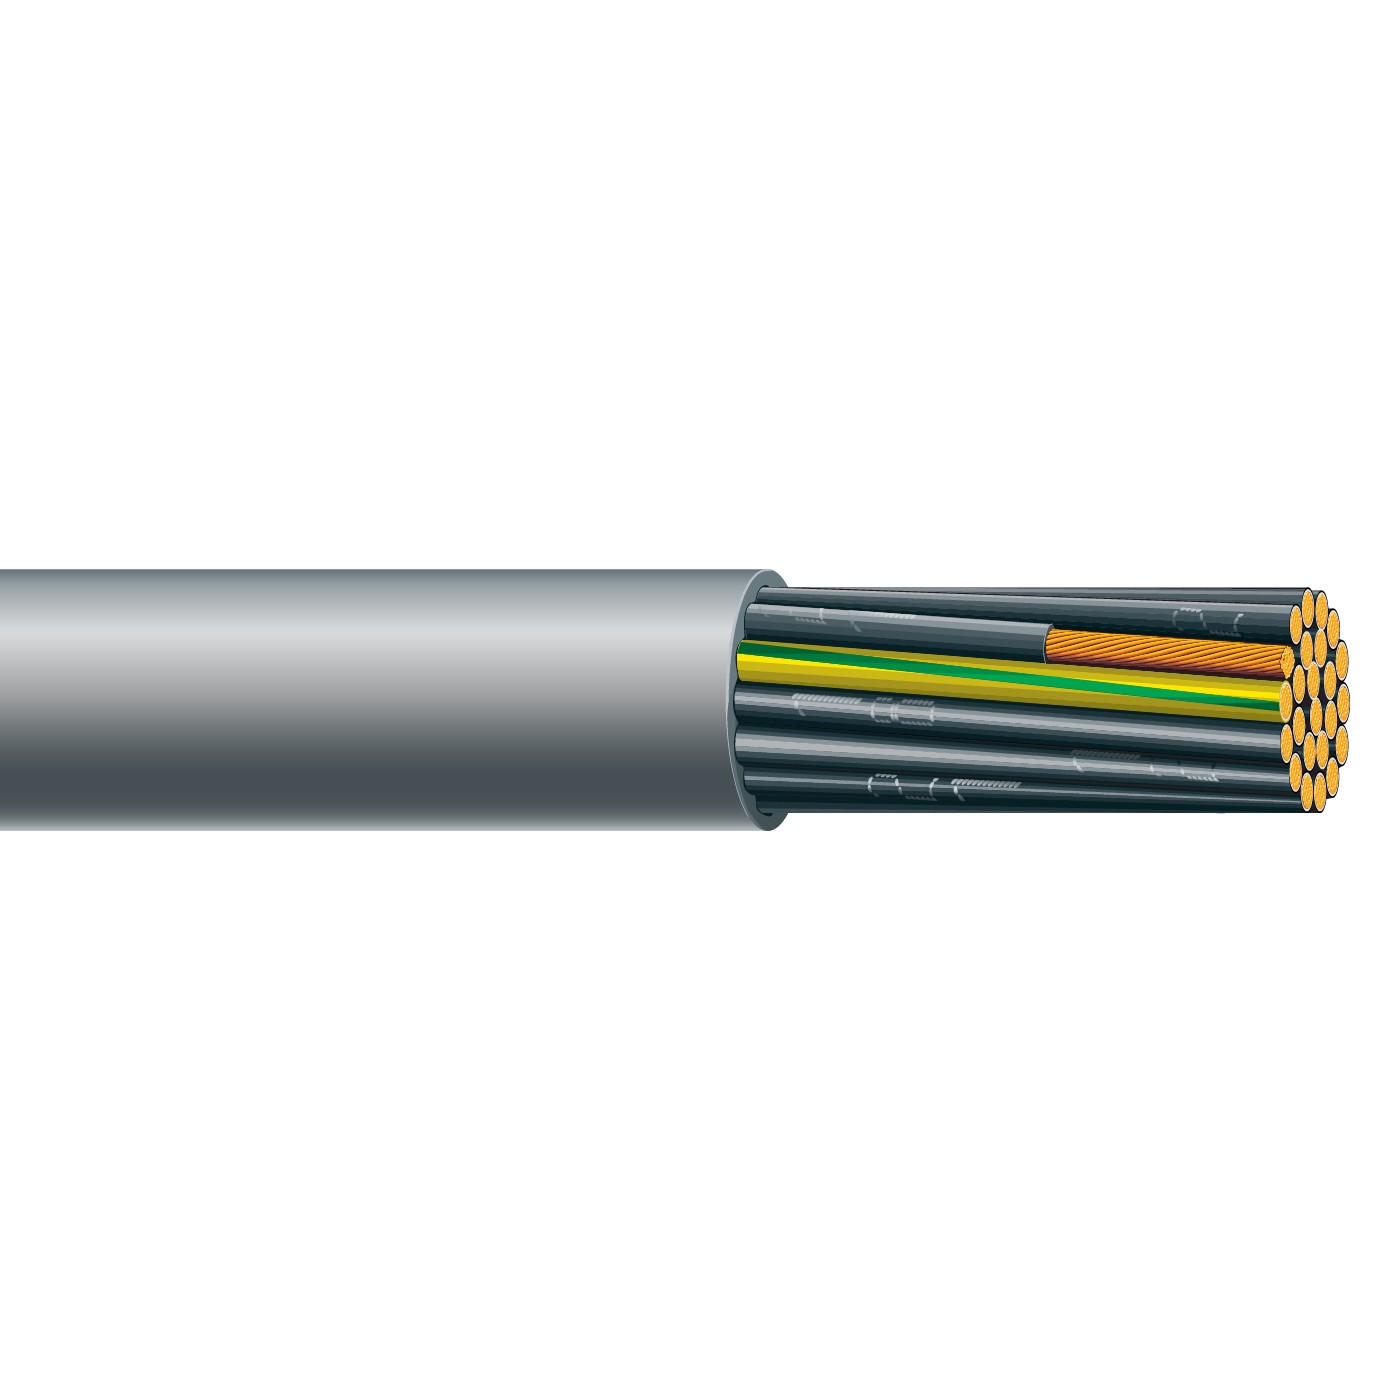 YSLY 300/500 PVC flexible control cable